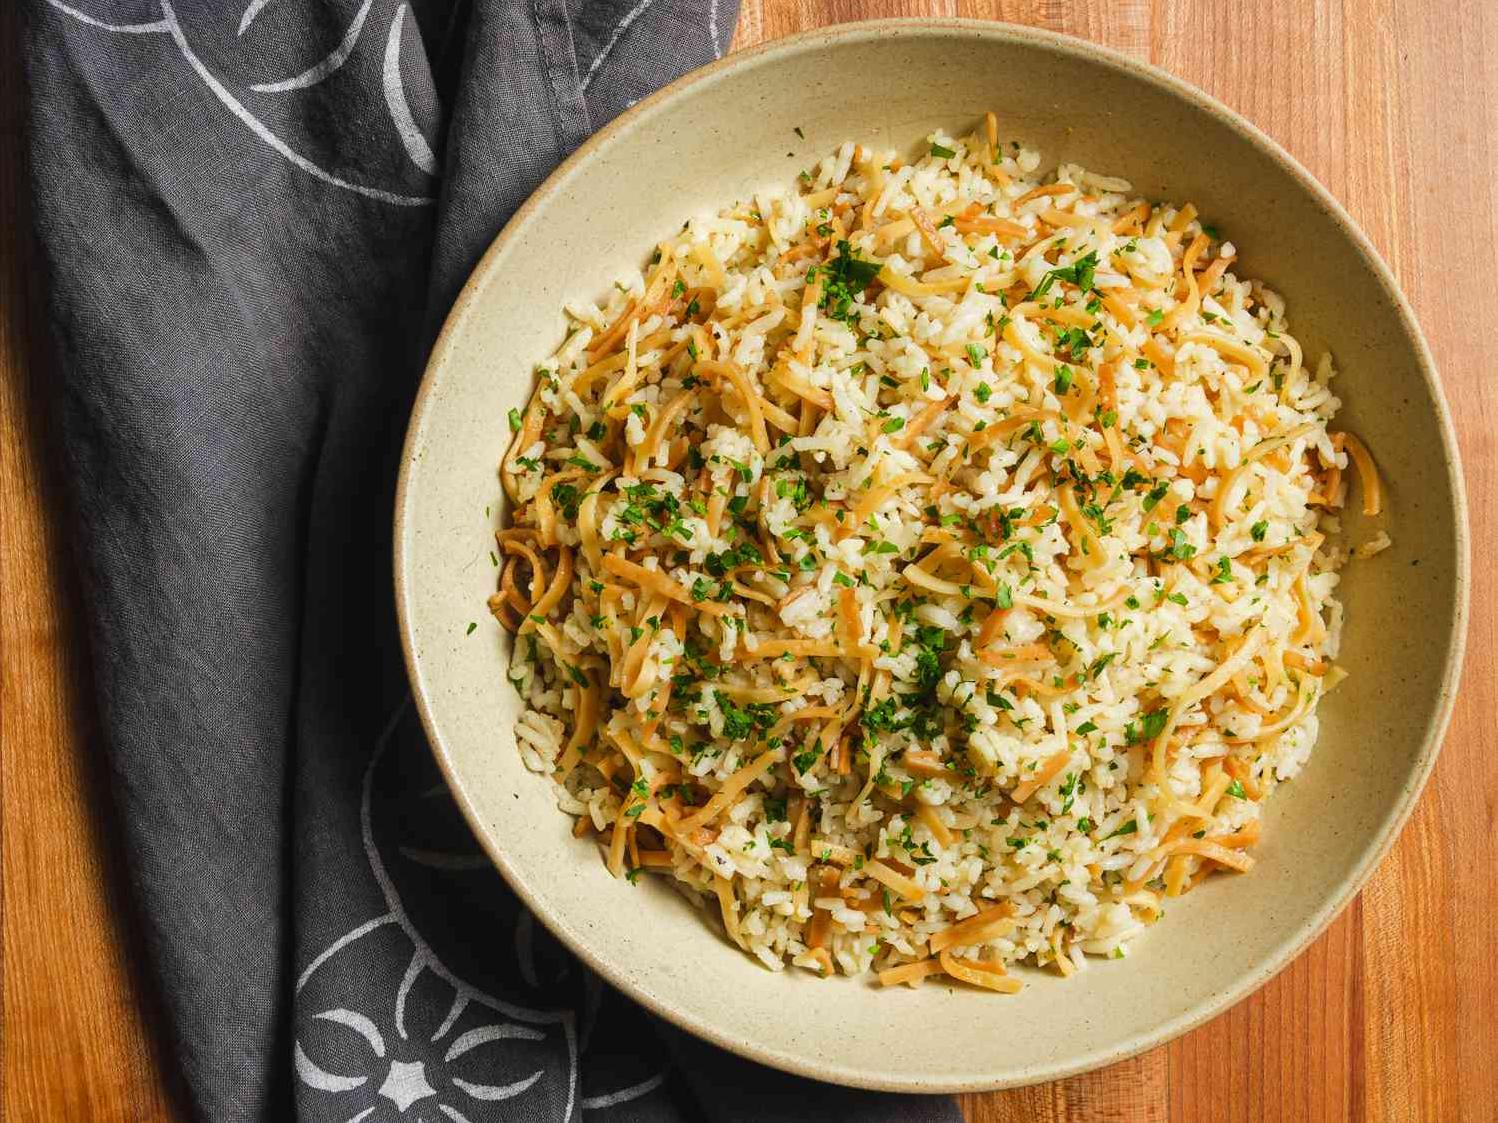  One bite of this heavenly rice pilaf will transport you to a bustling bazaar in Tel Aviv.